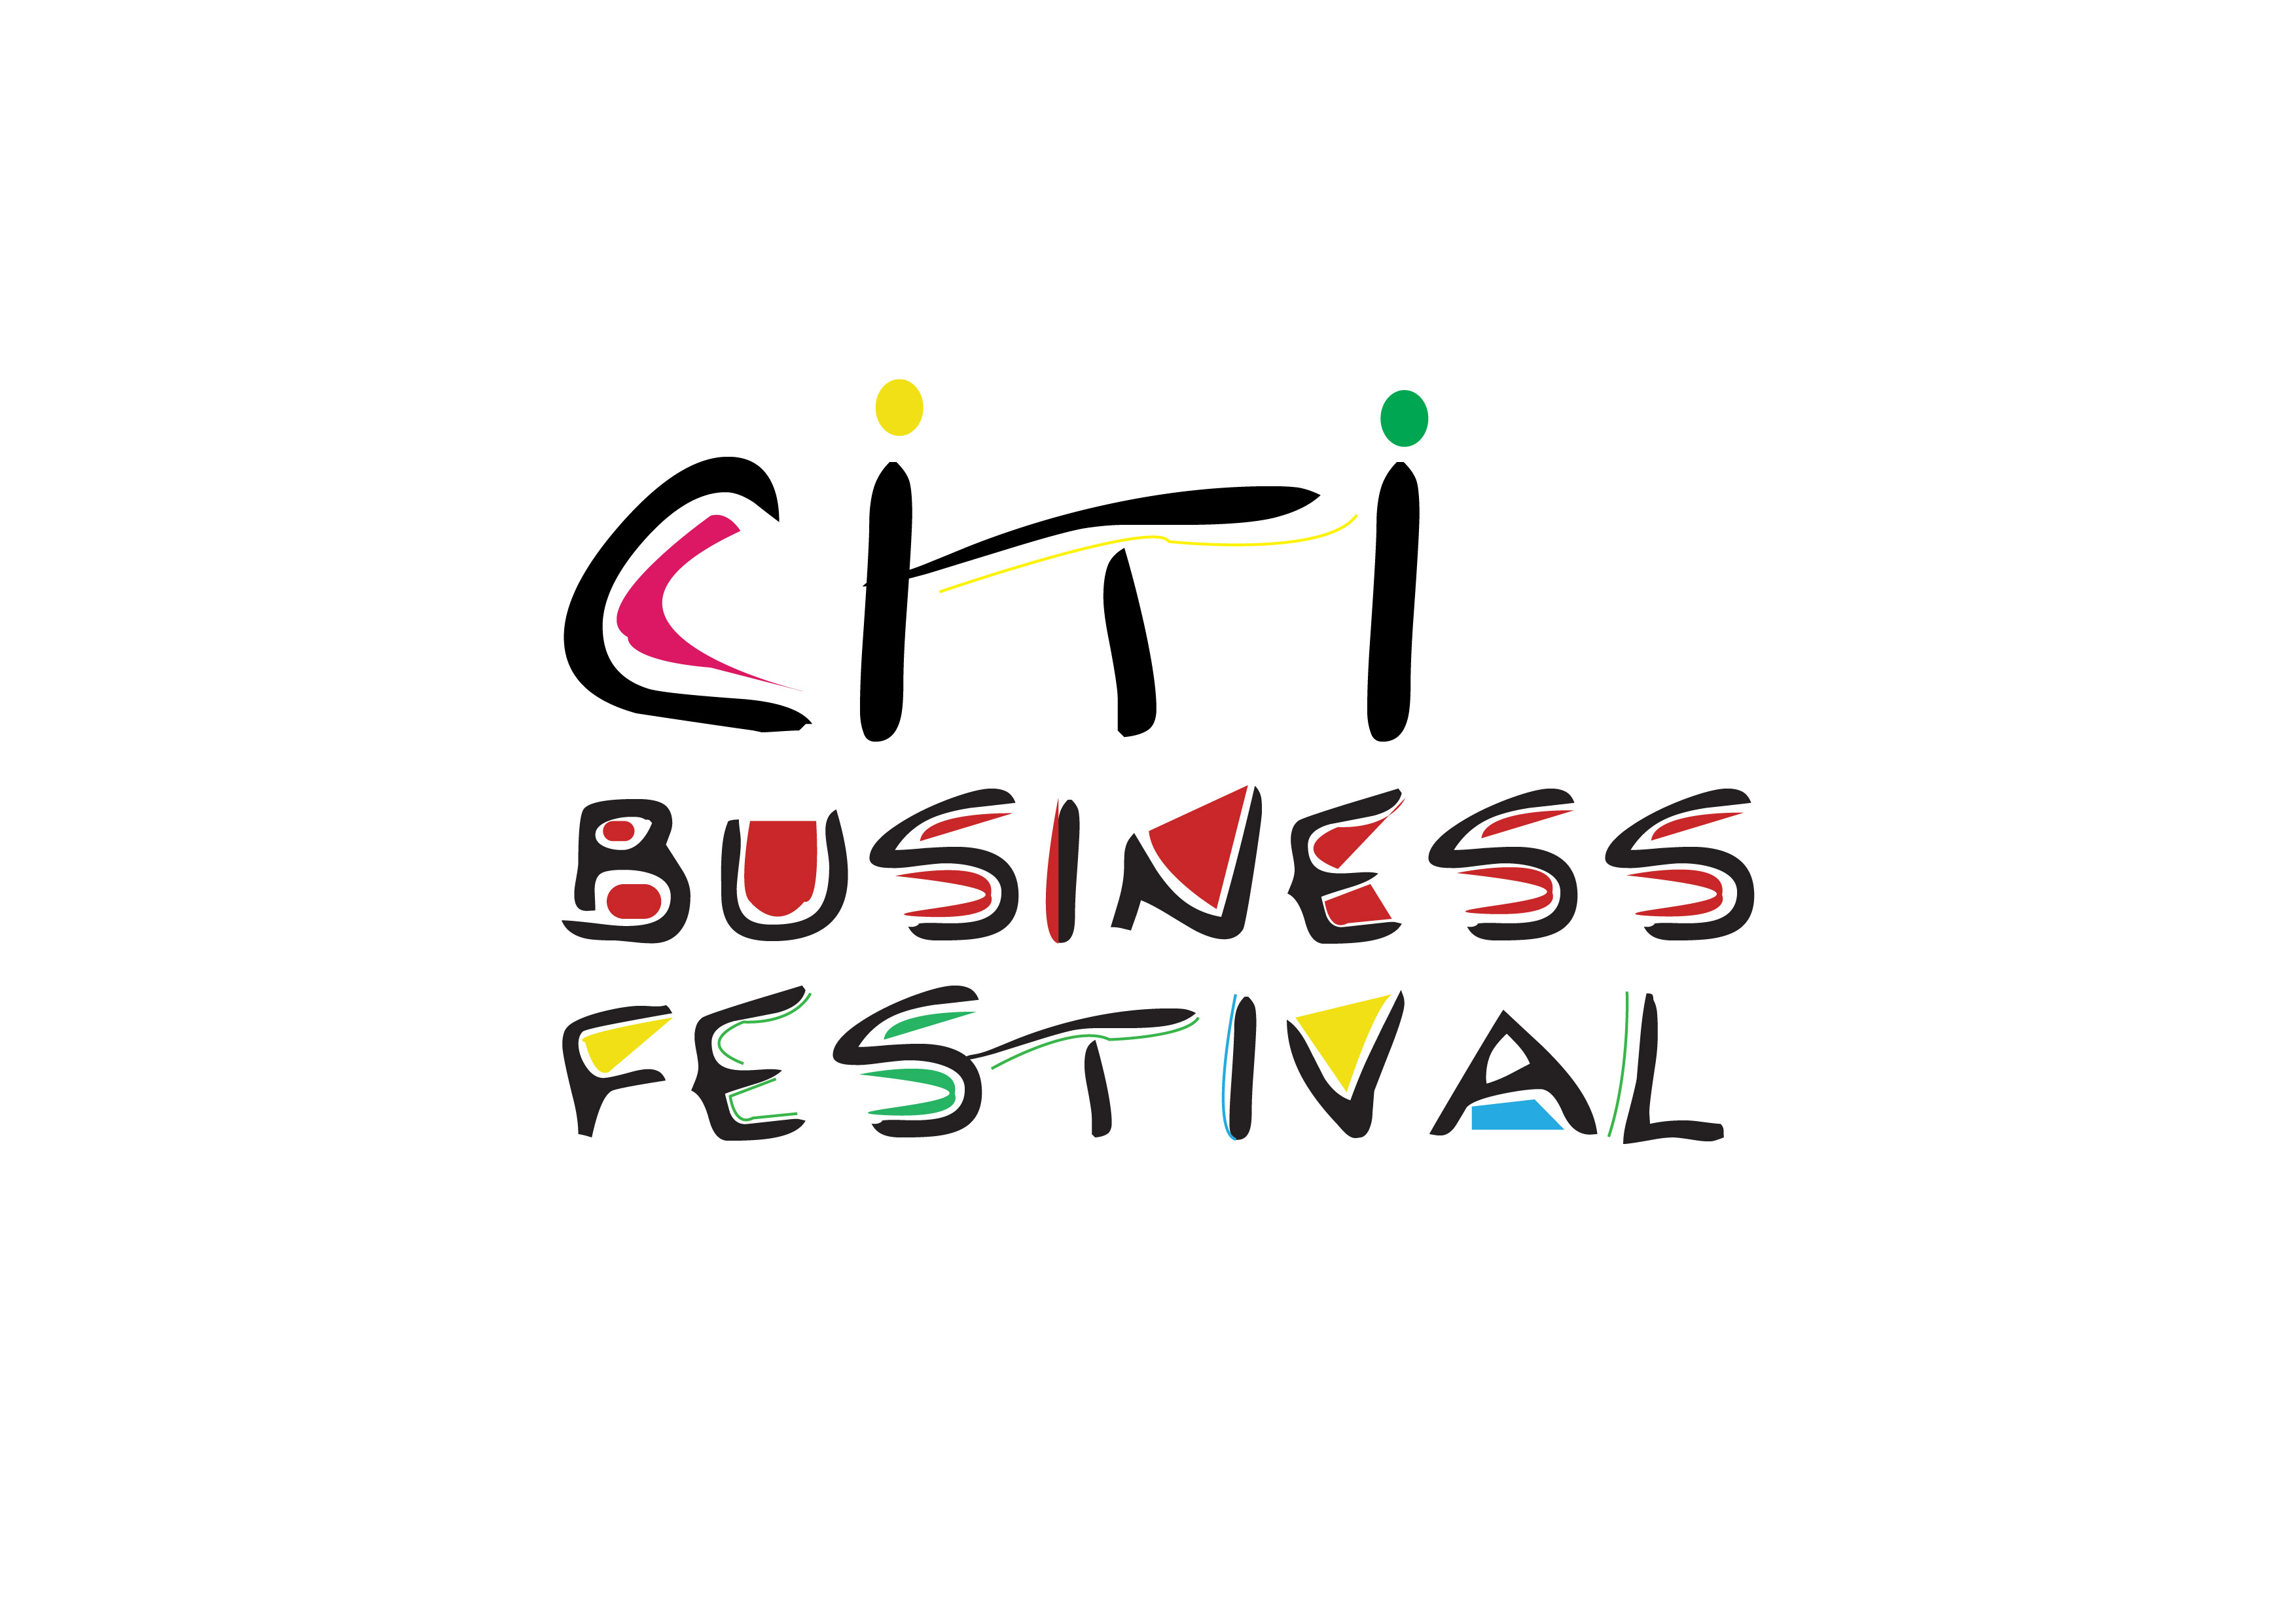 #CitiBizFestival: All set for The Innovation Summit tomorrow